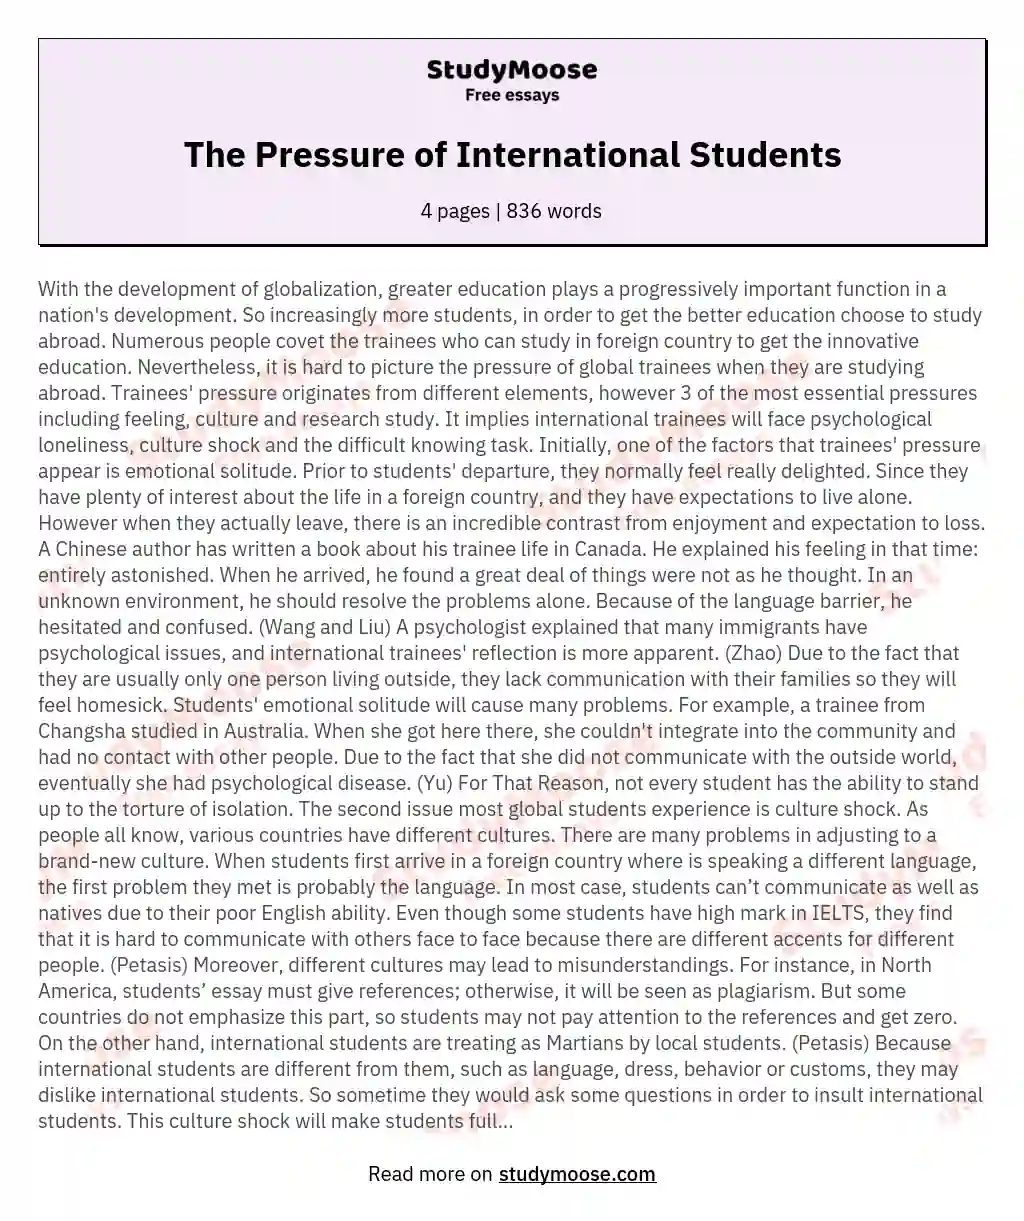 The Pressure of International Students essay